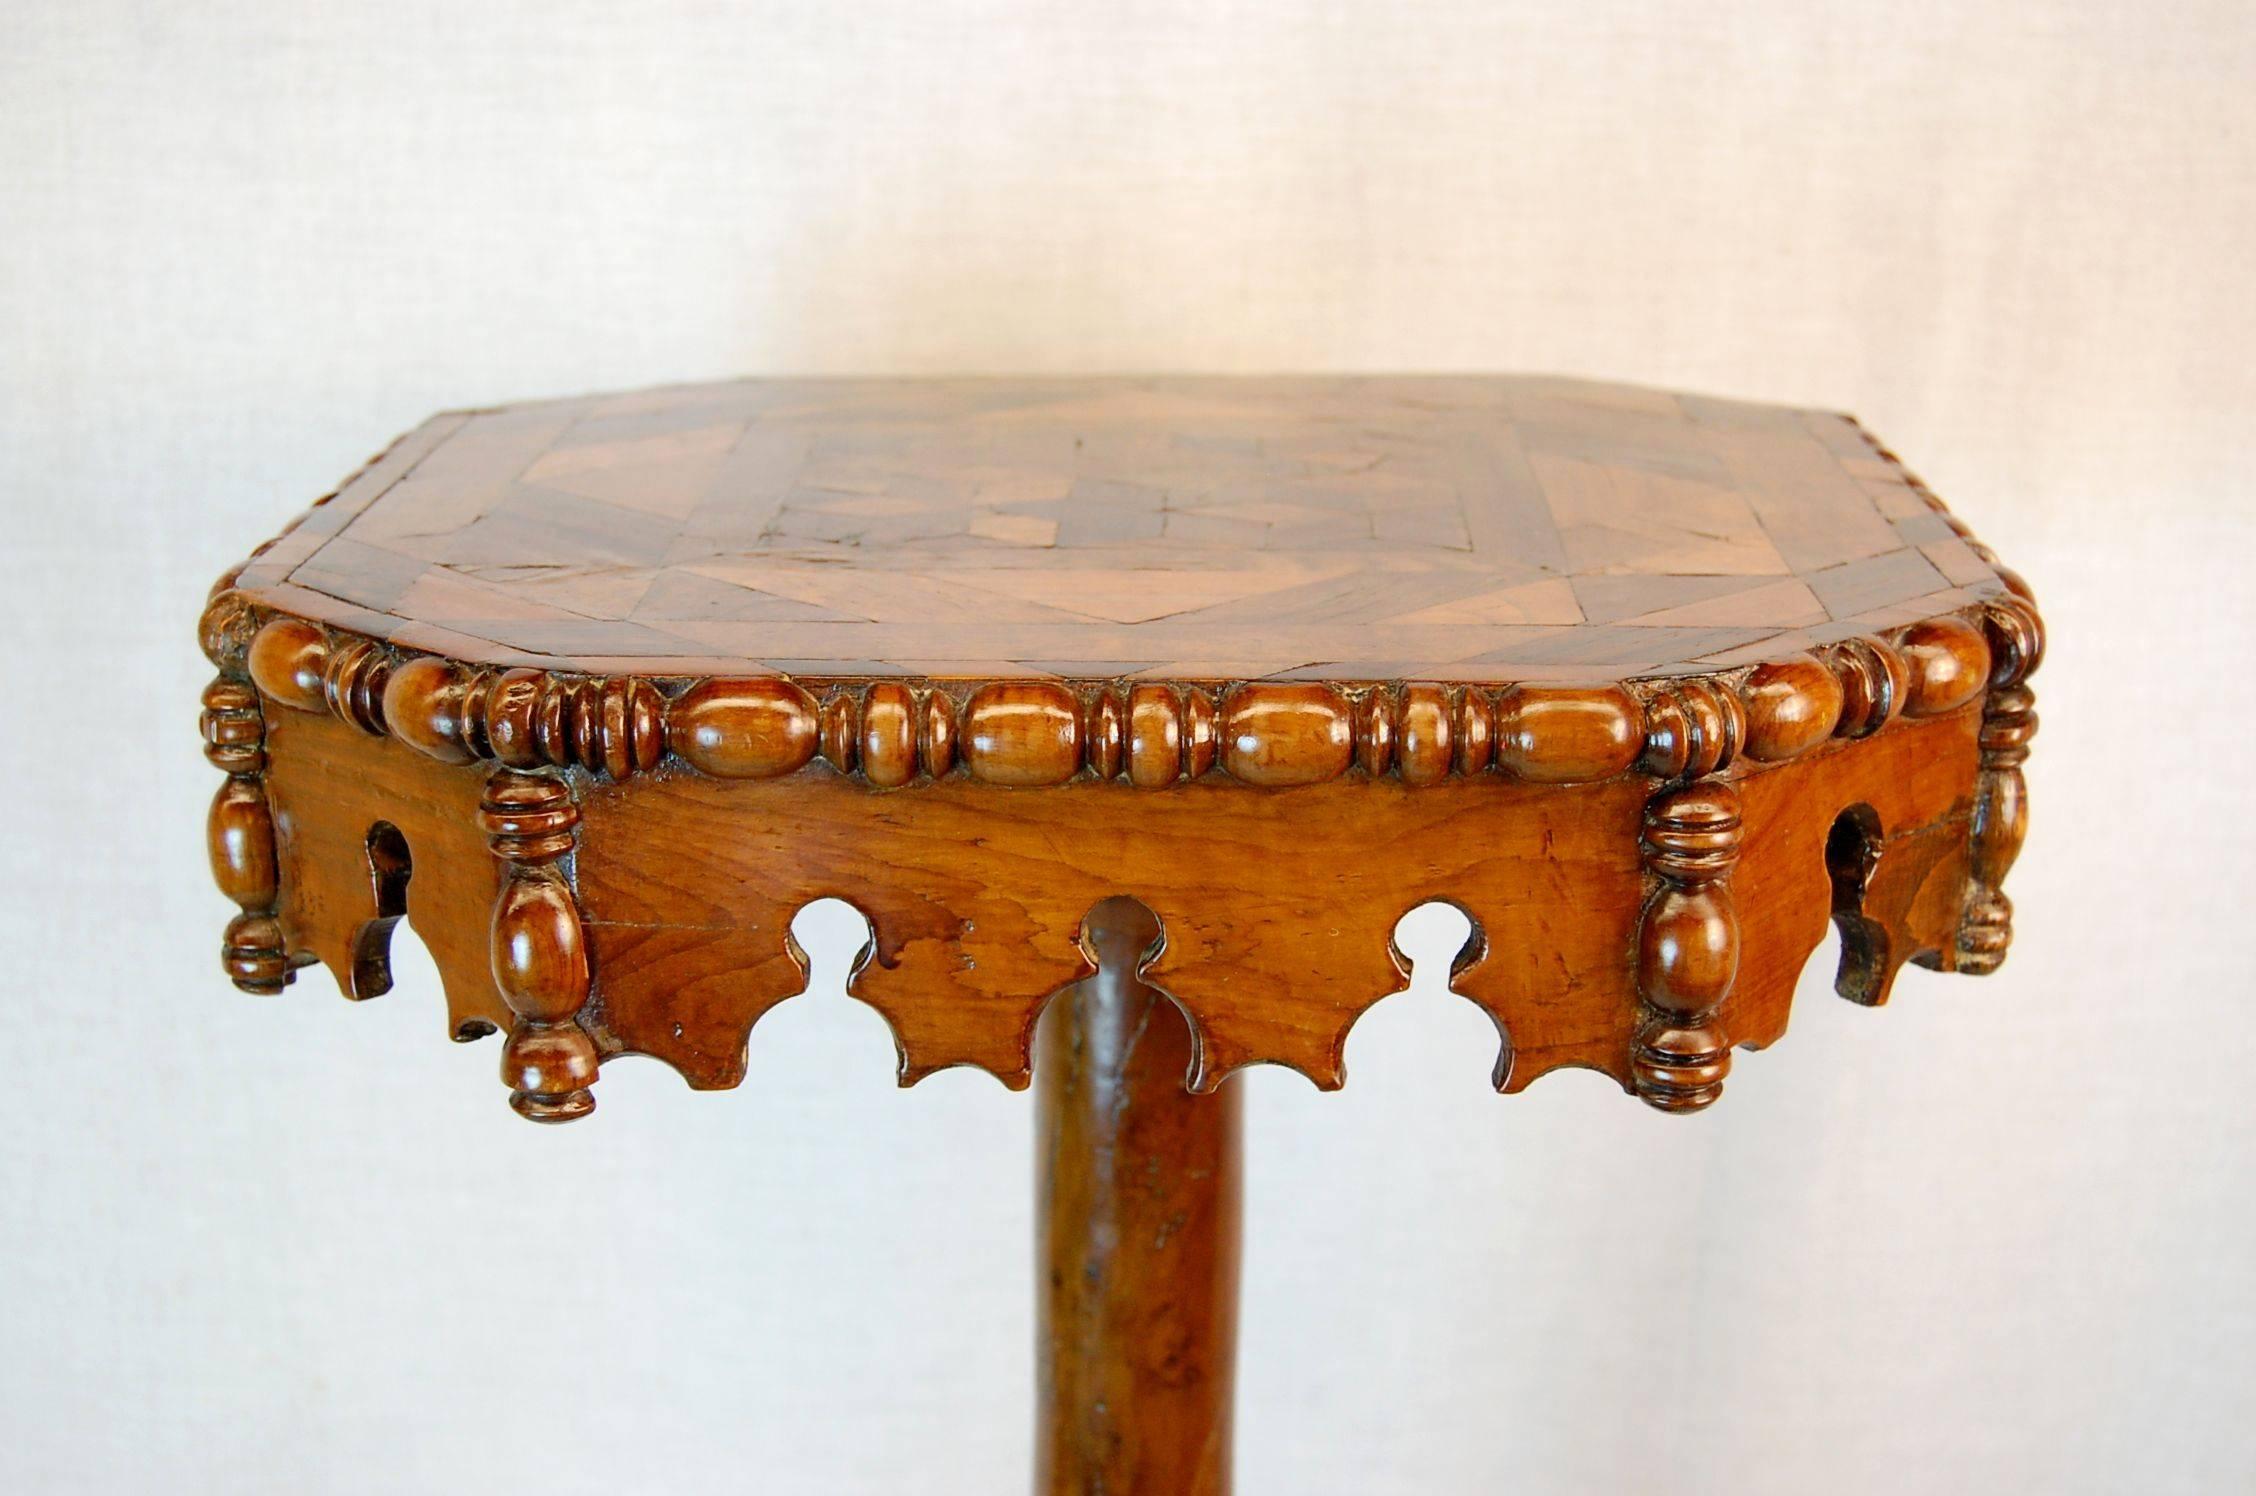 19th Century A William IV Parquetry Candle Stand with Octagonal Top and Gothic Themed Apron